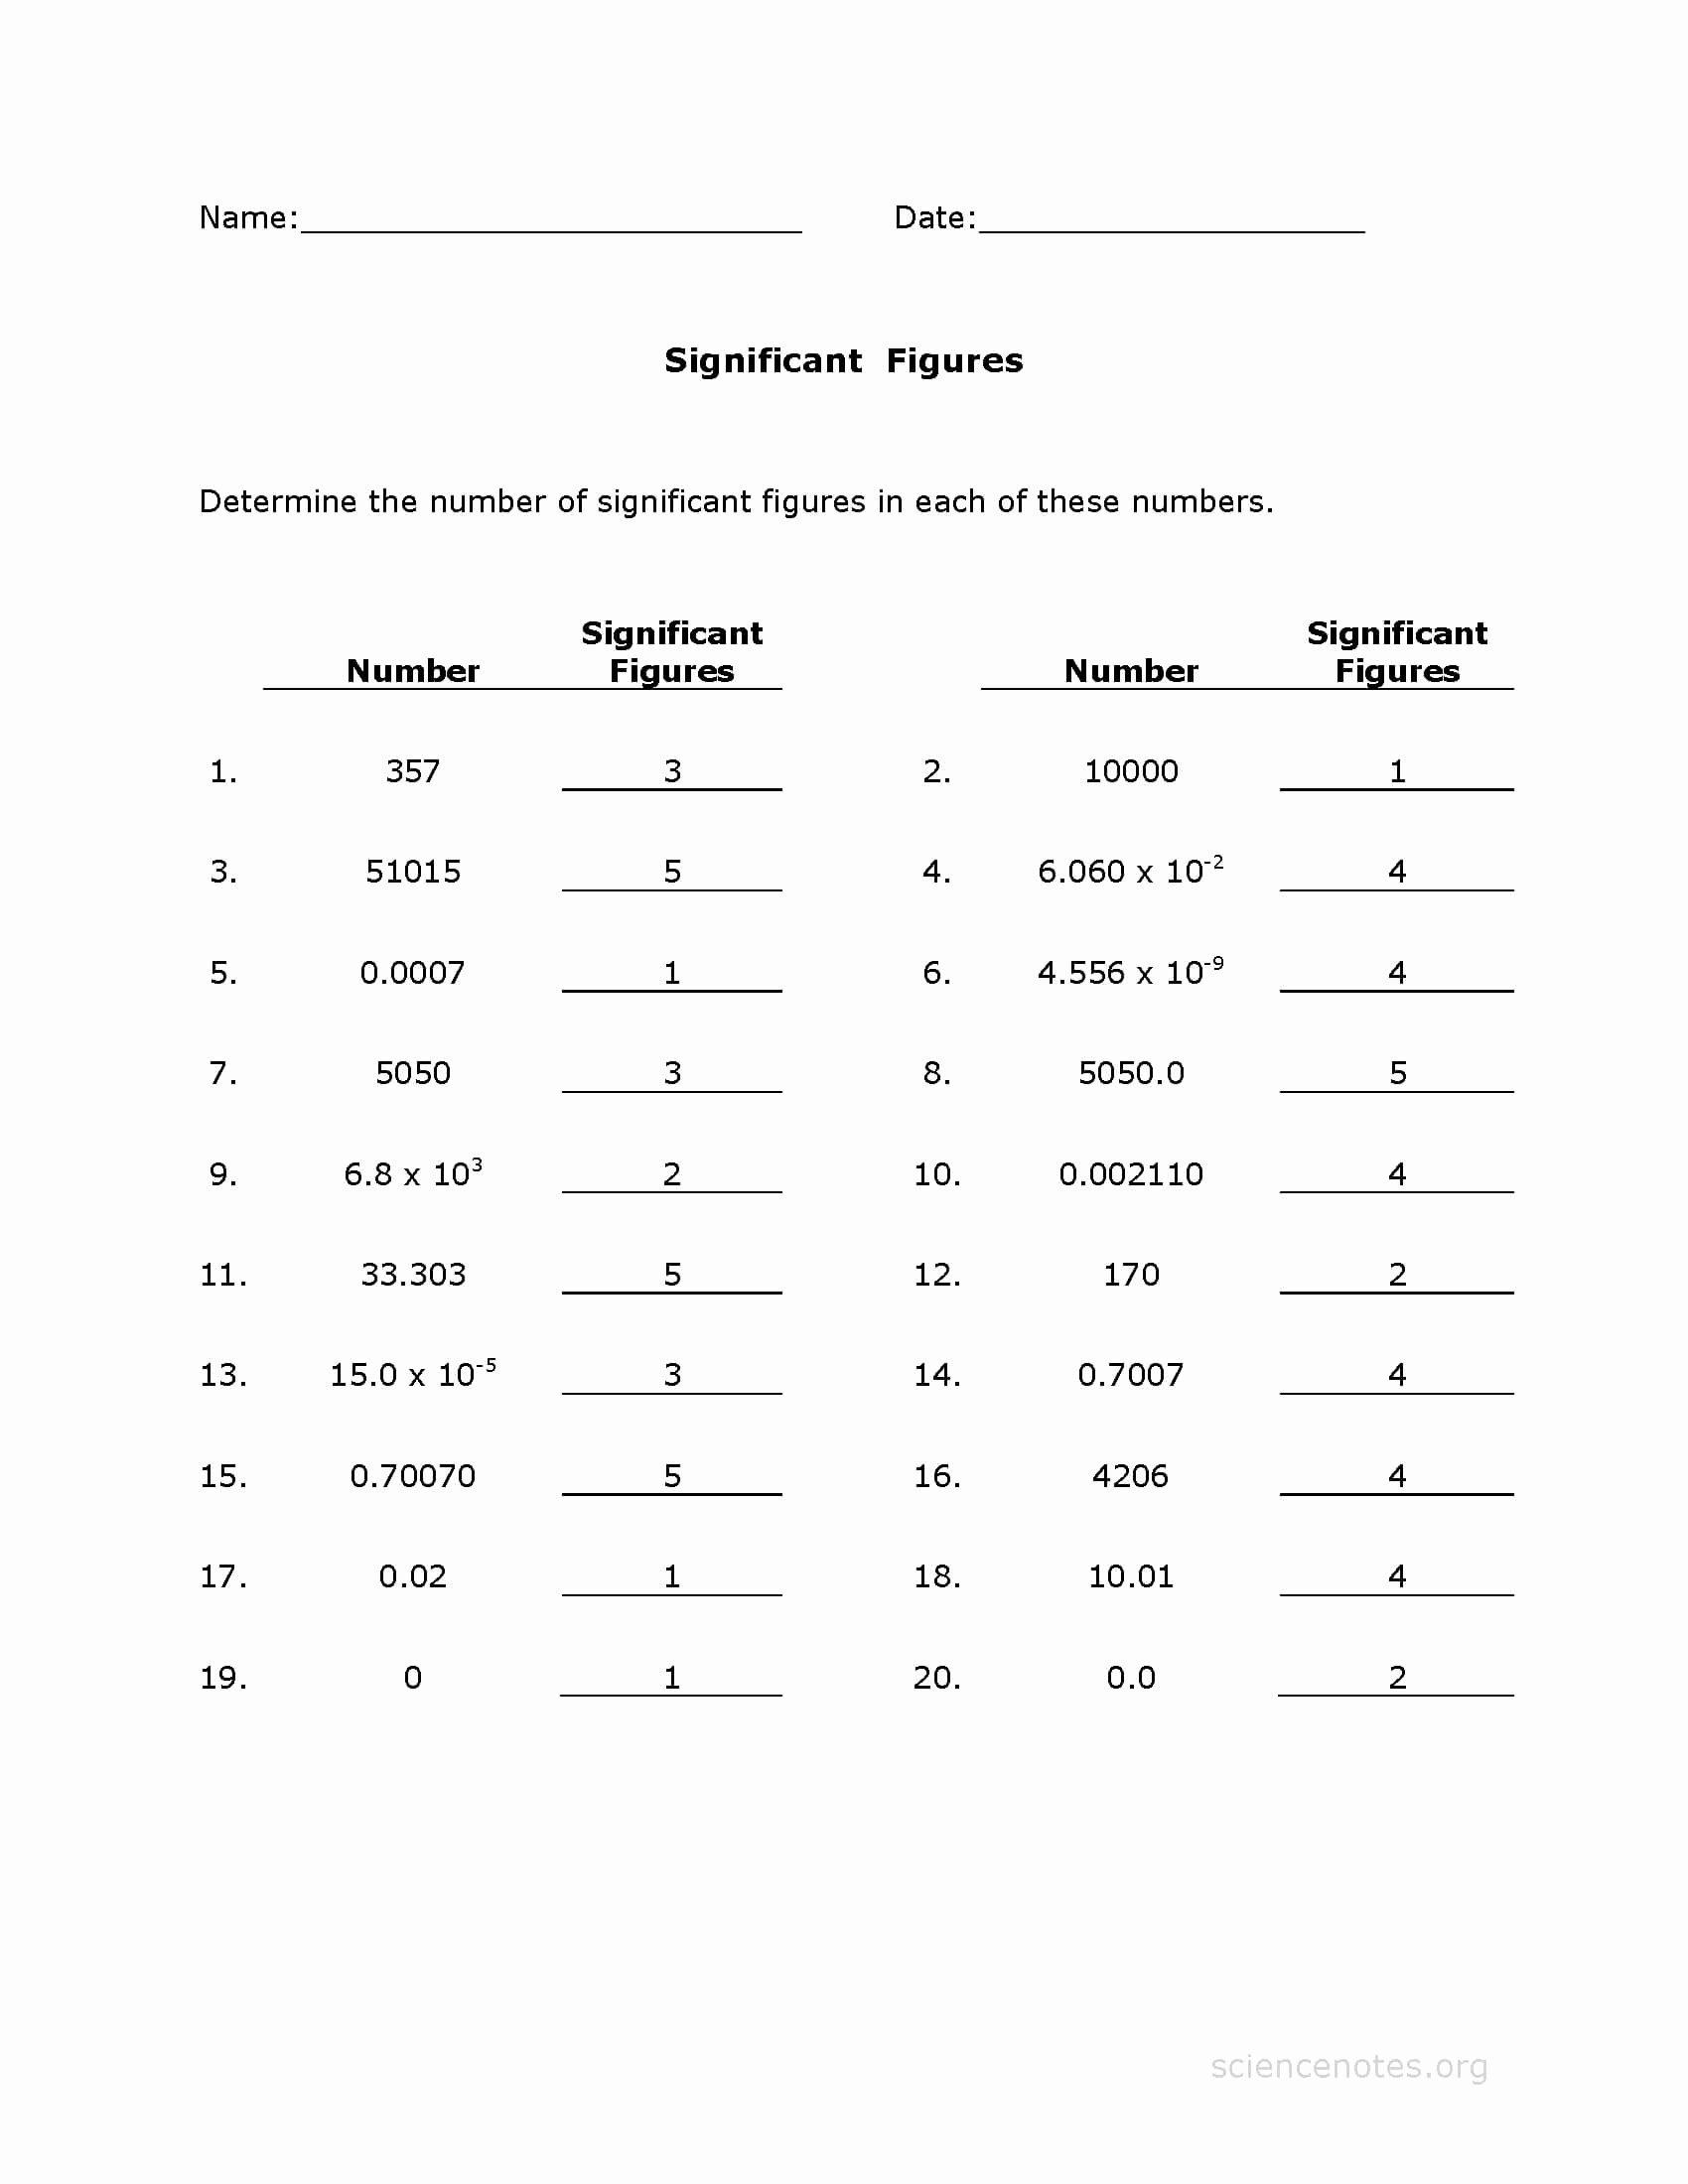 Significant Figures Worksheet with Answers Best Of Significant Figures Worksheet Page 2 Of 2